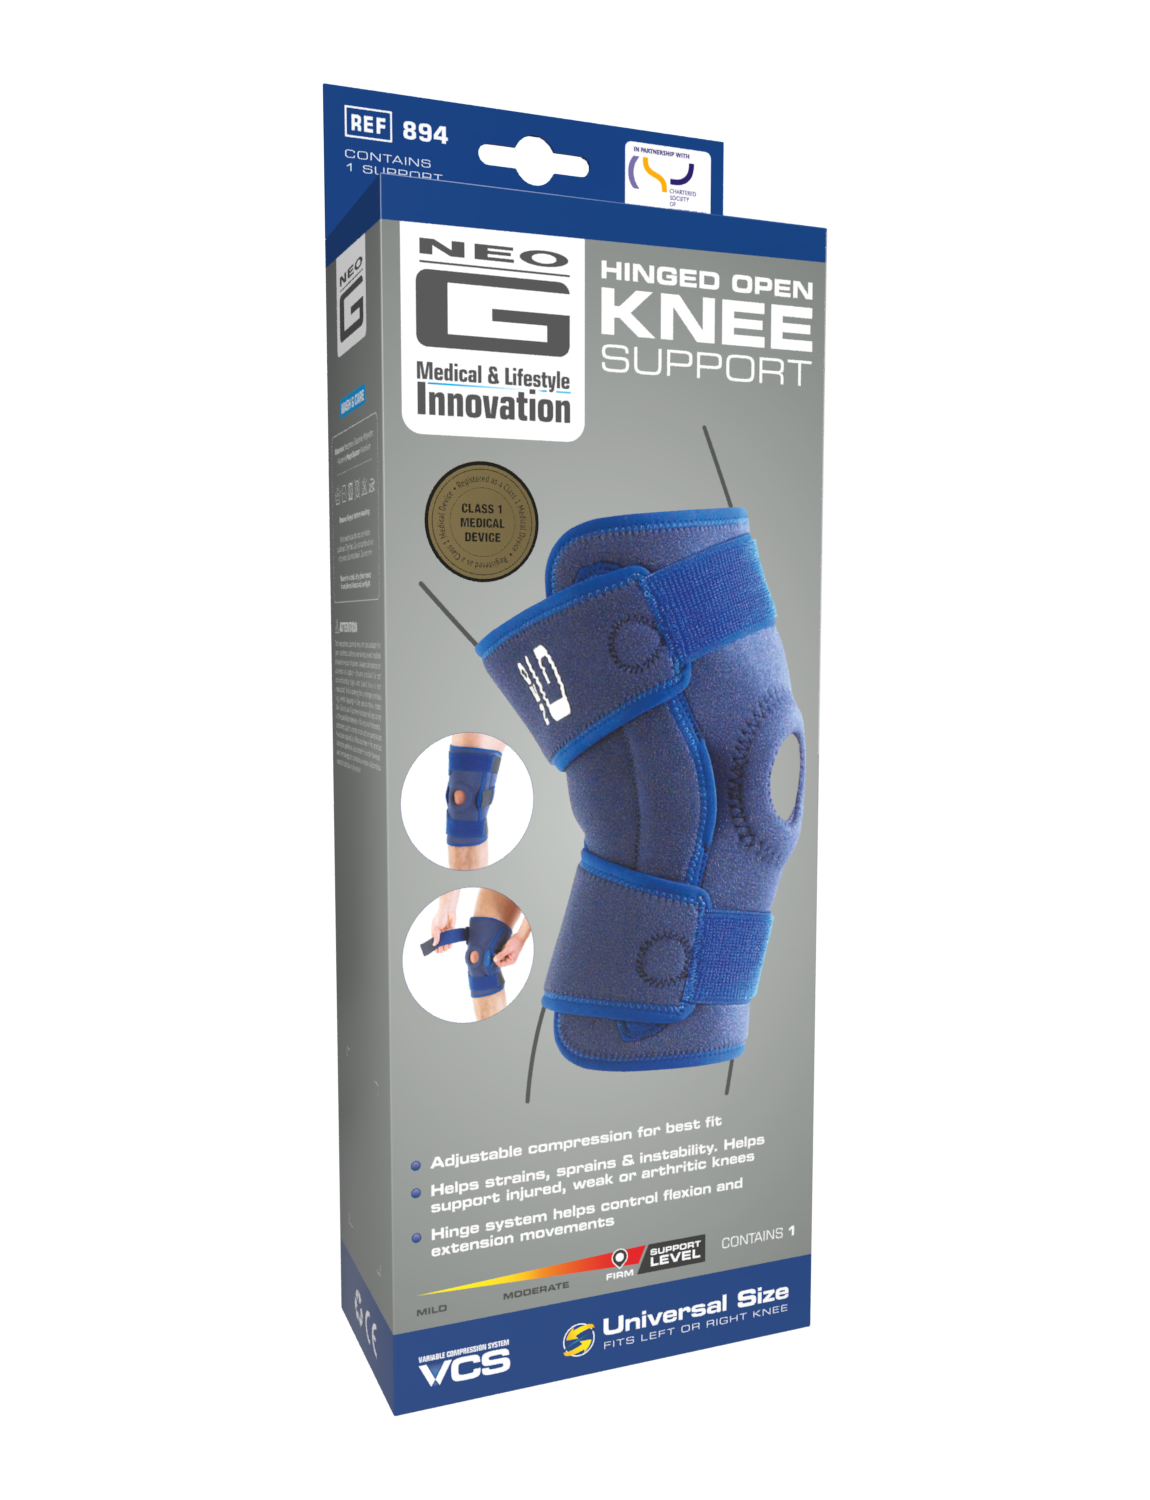 Neo G Hinged Open Knee Support – Neo G USA